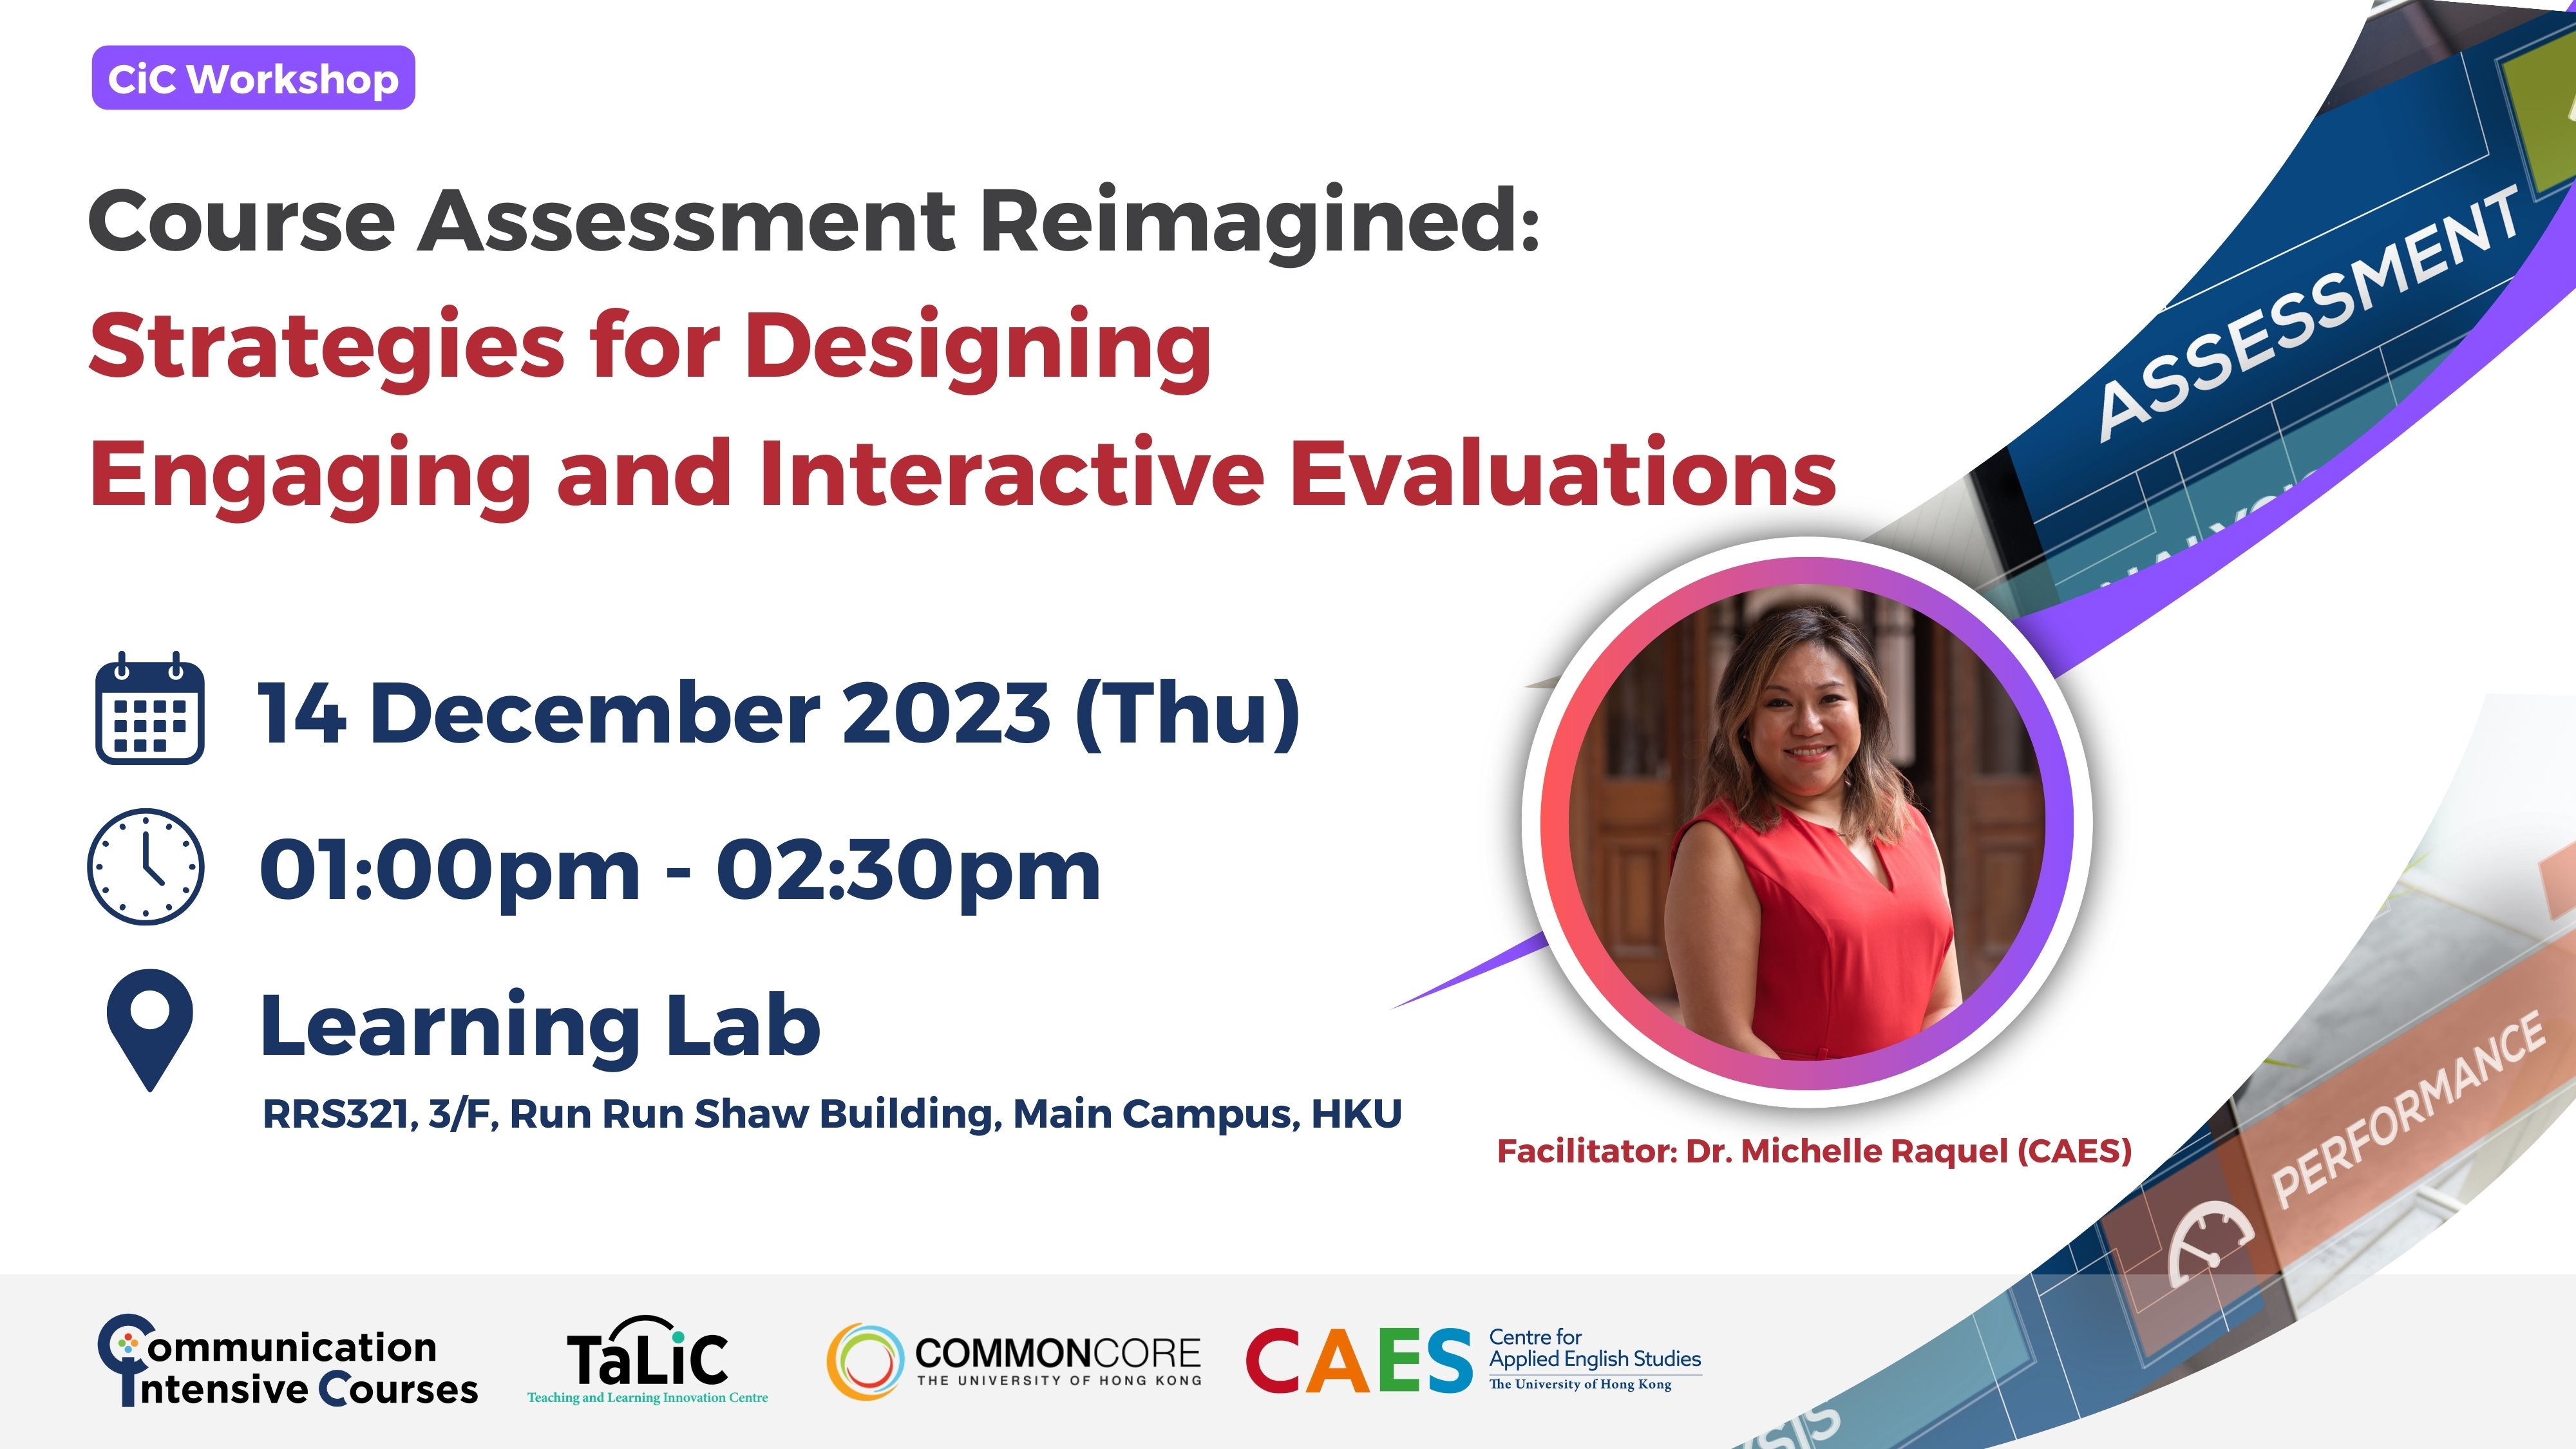 Course Assessment Reimagined: Strategies for Designing Engaging and Interactive Evaluations